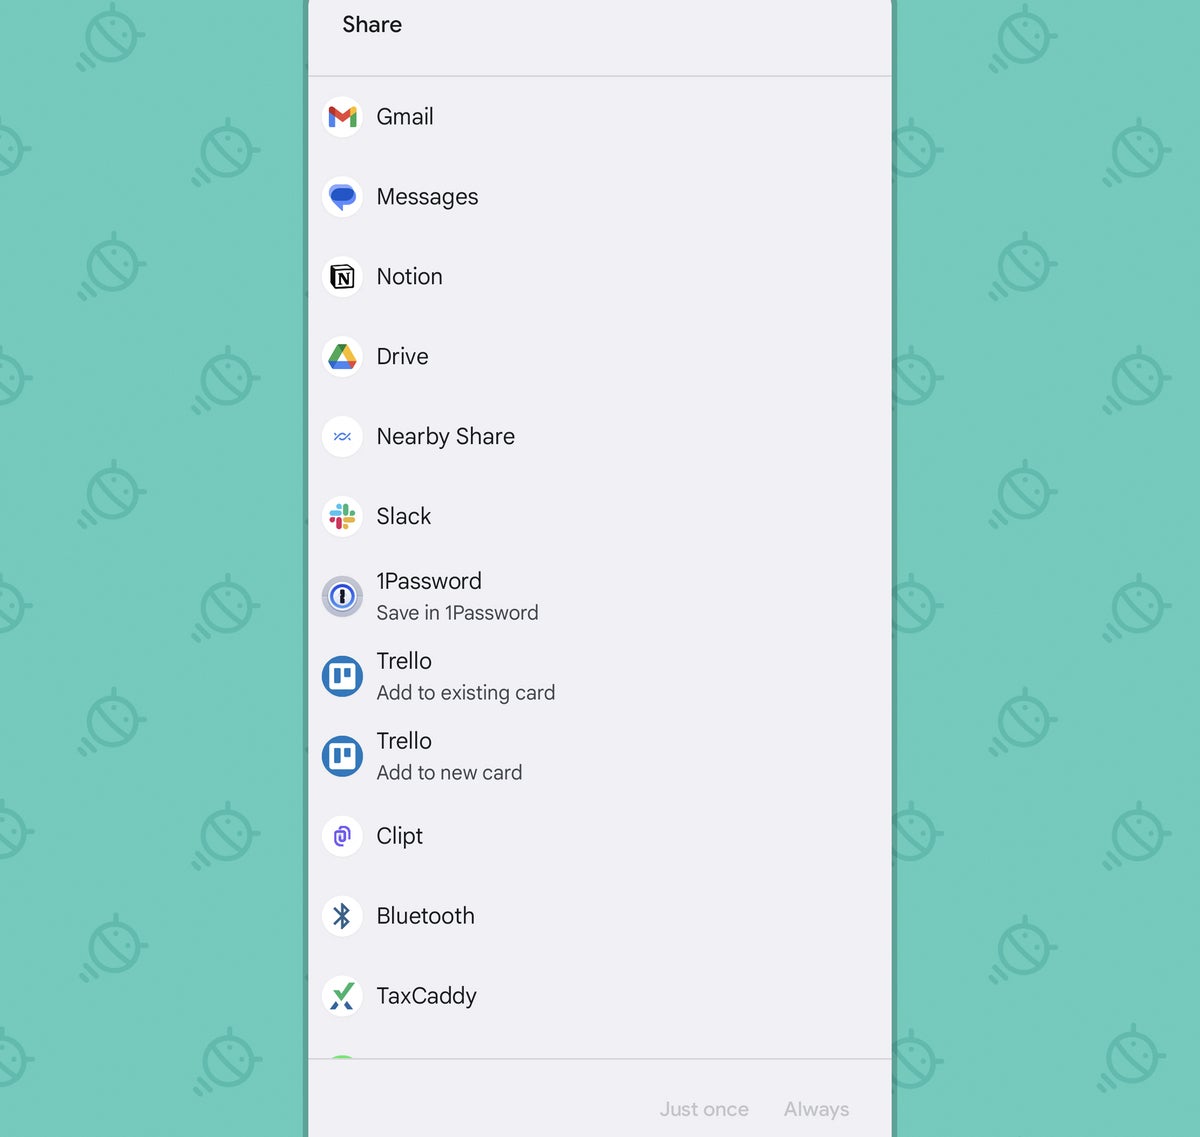 Google Docs Android share file